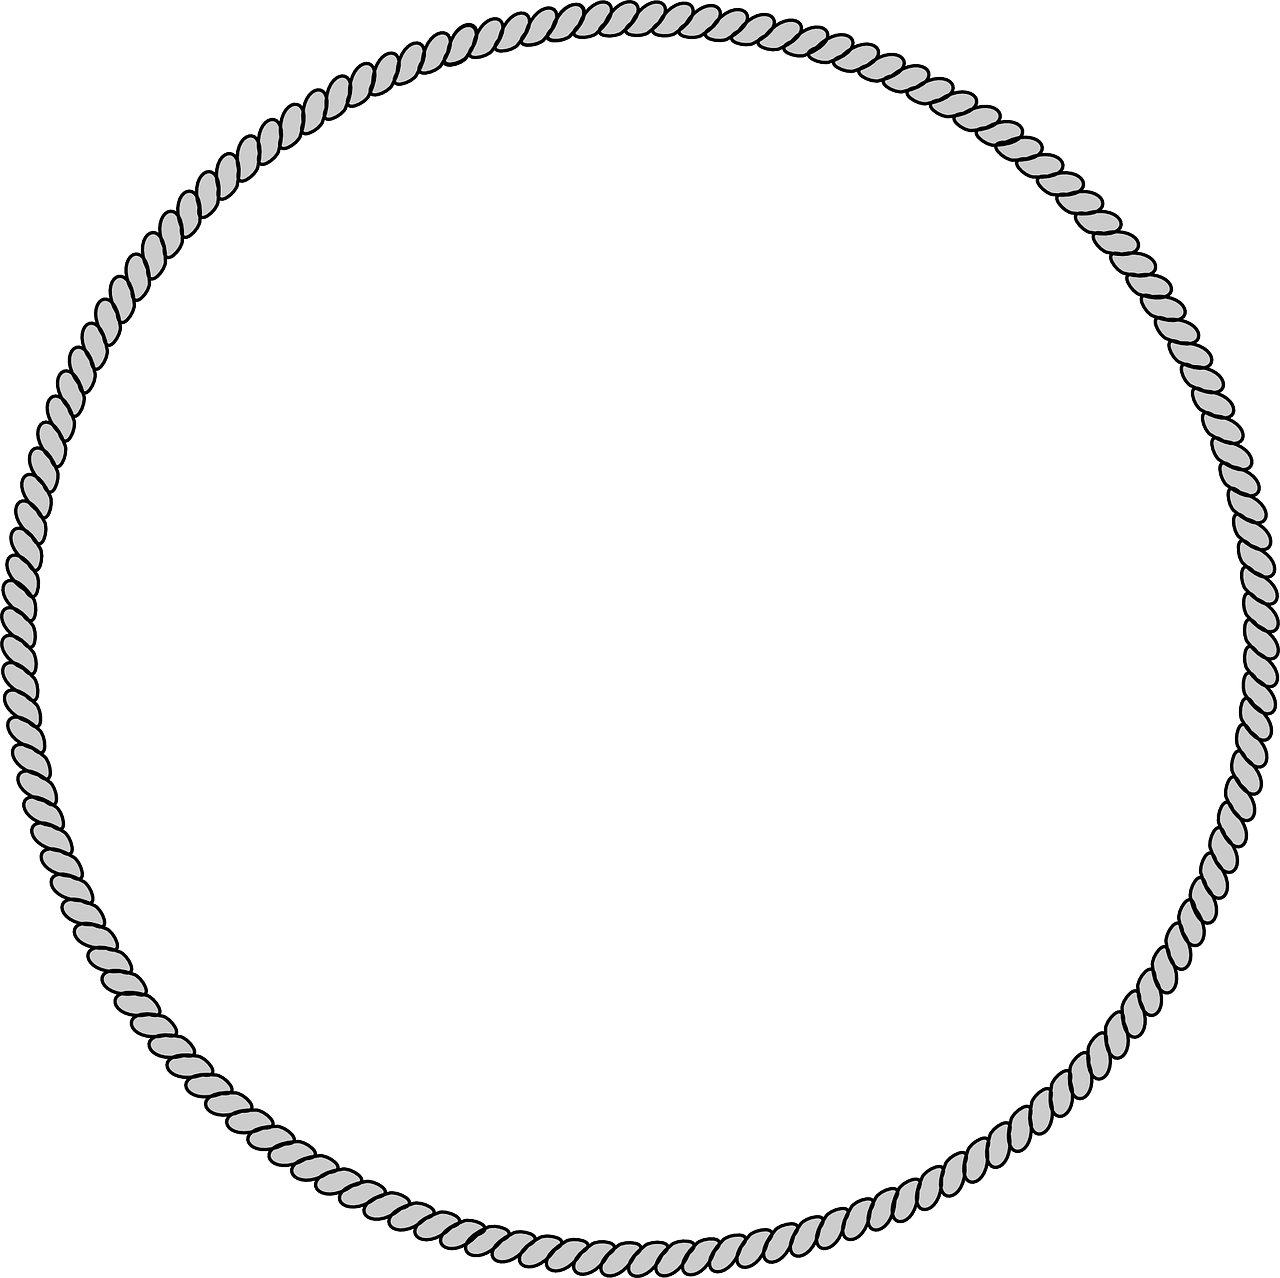 a white rope circle on a black background, a stipple, deviantart, metal border, uploaded, large chain, no outline